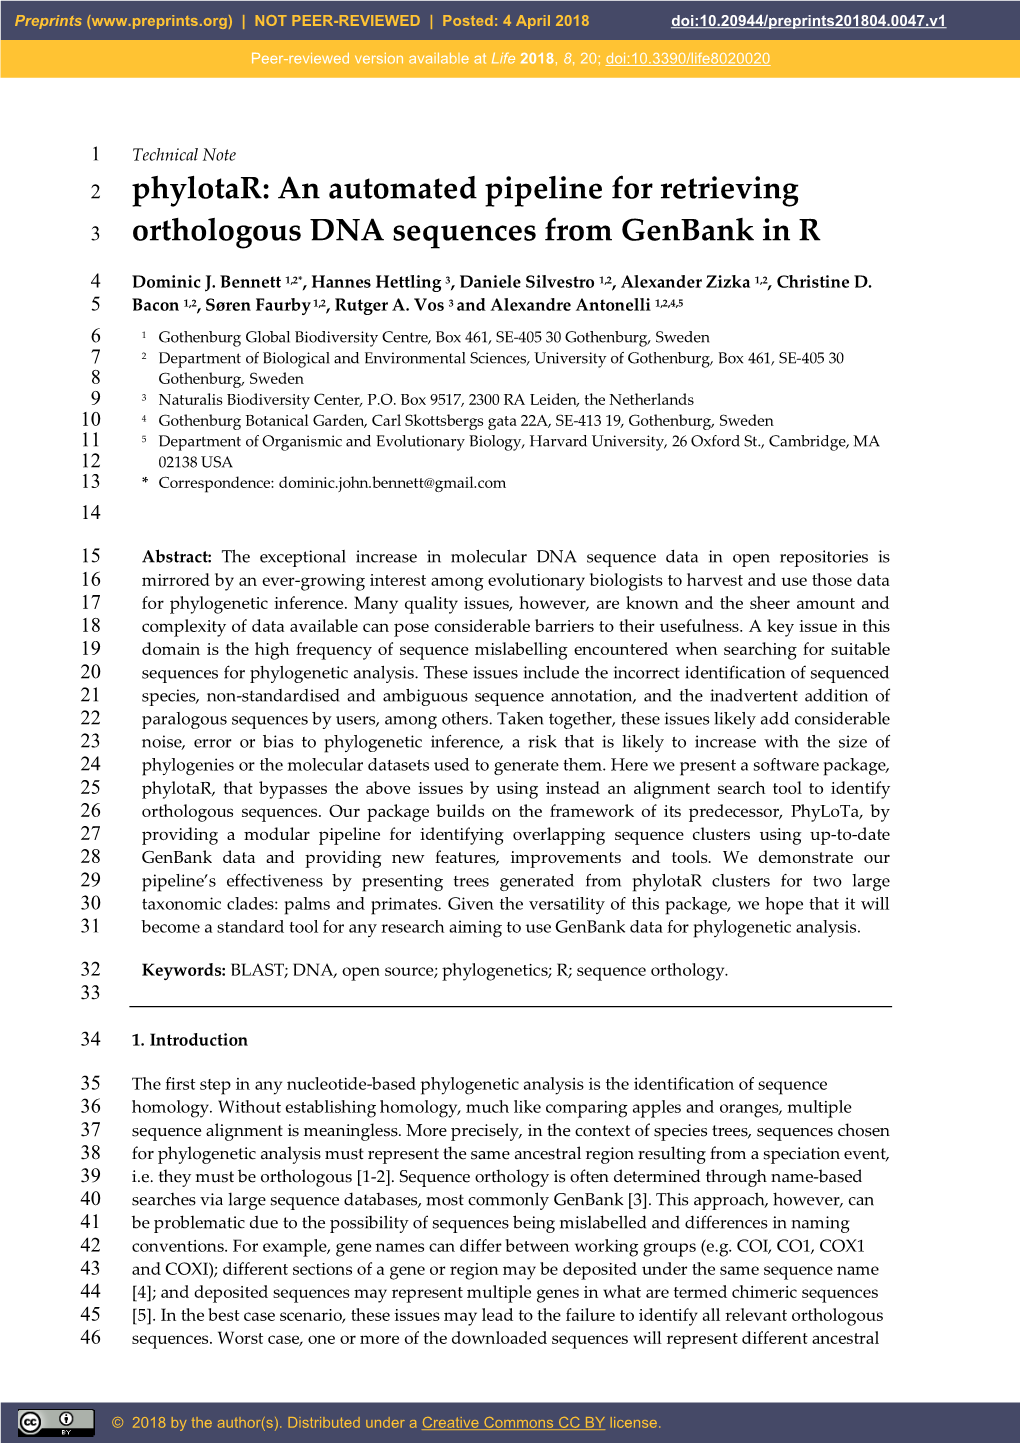 Phylotar: an Automated Pipeline for Retrieving Orthologous DNA Sequences from Genbank in R